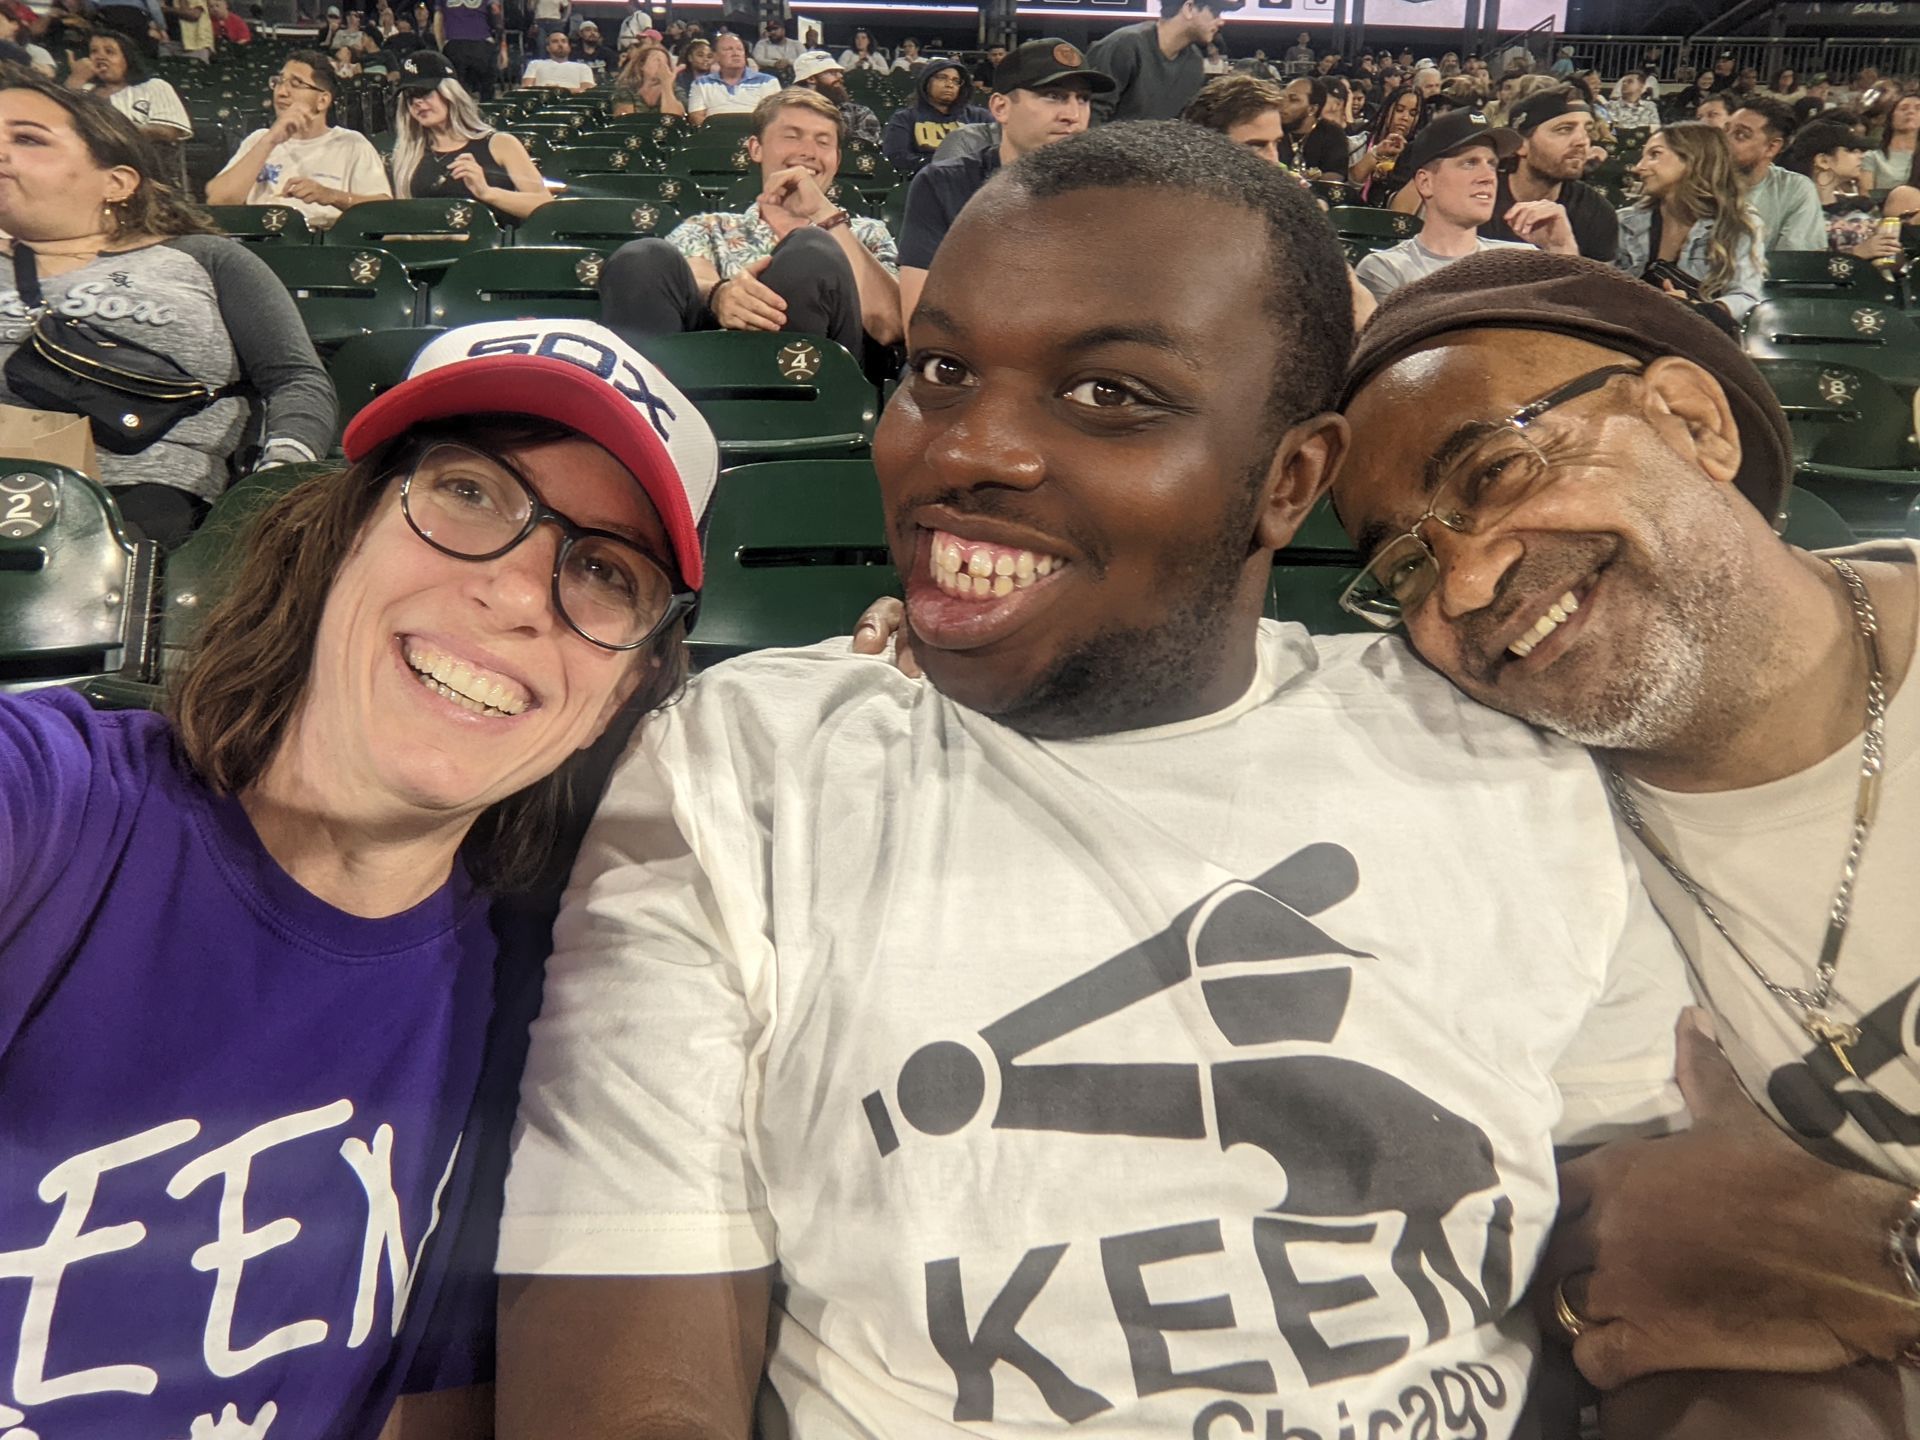 KEEN Athlete, aide, and Executive Director at the game